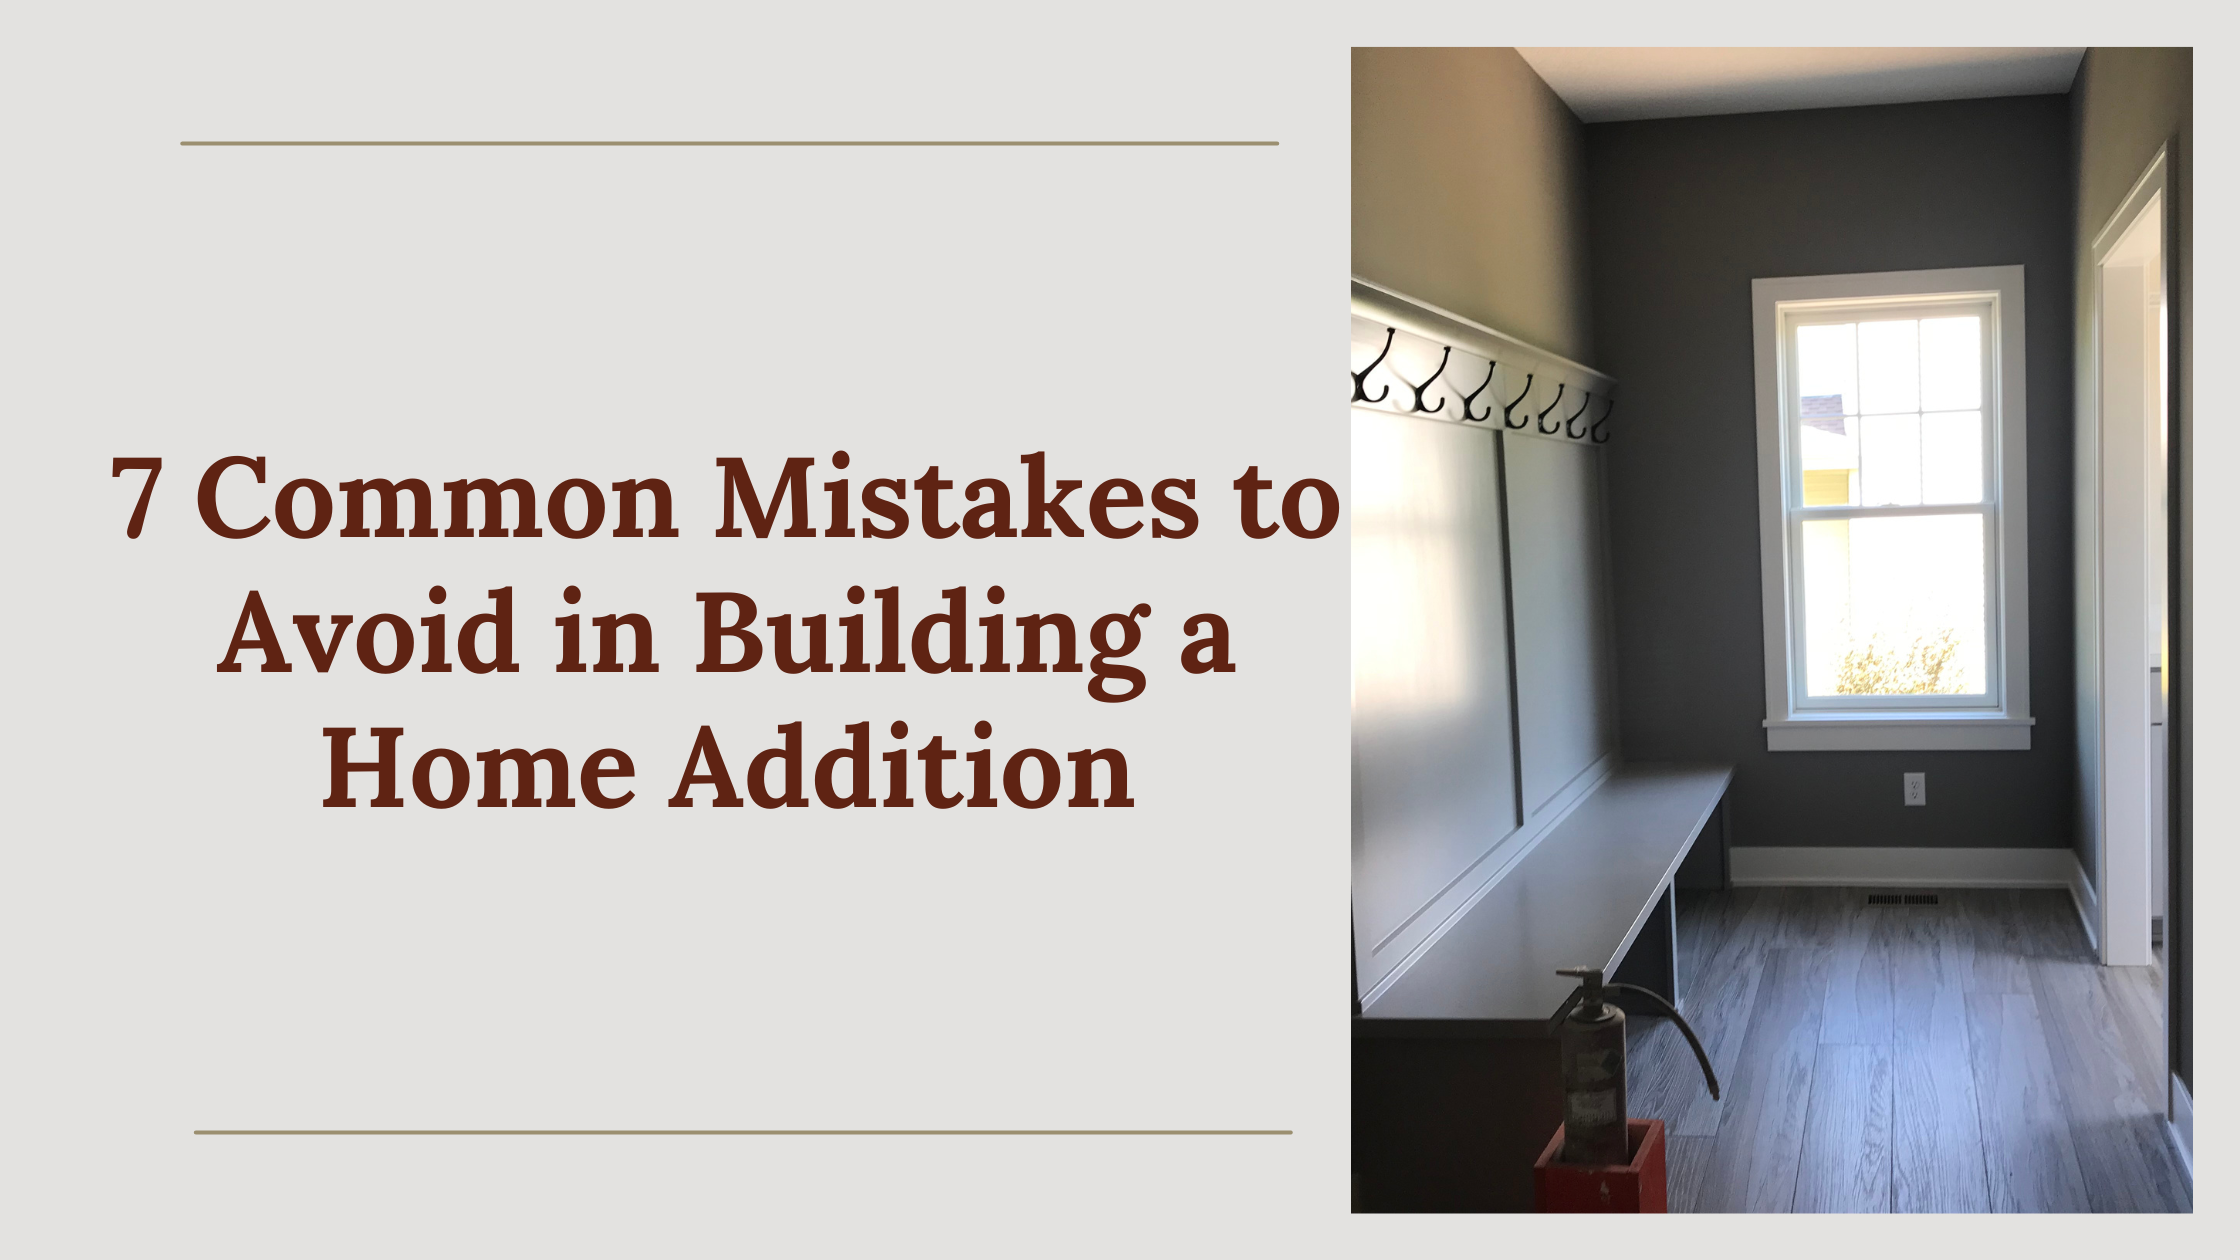 7 Common Mistakes to Avoid in Building a Home Addition